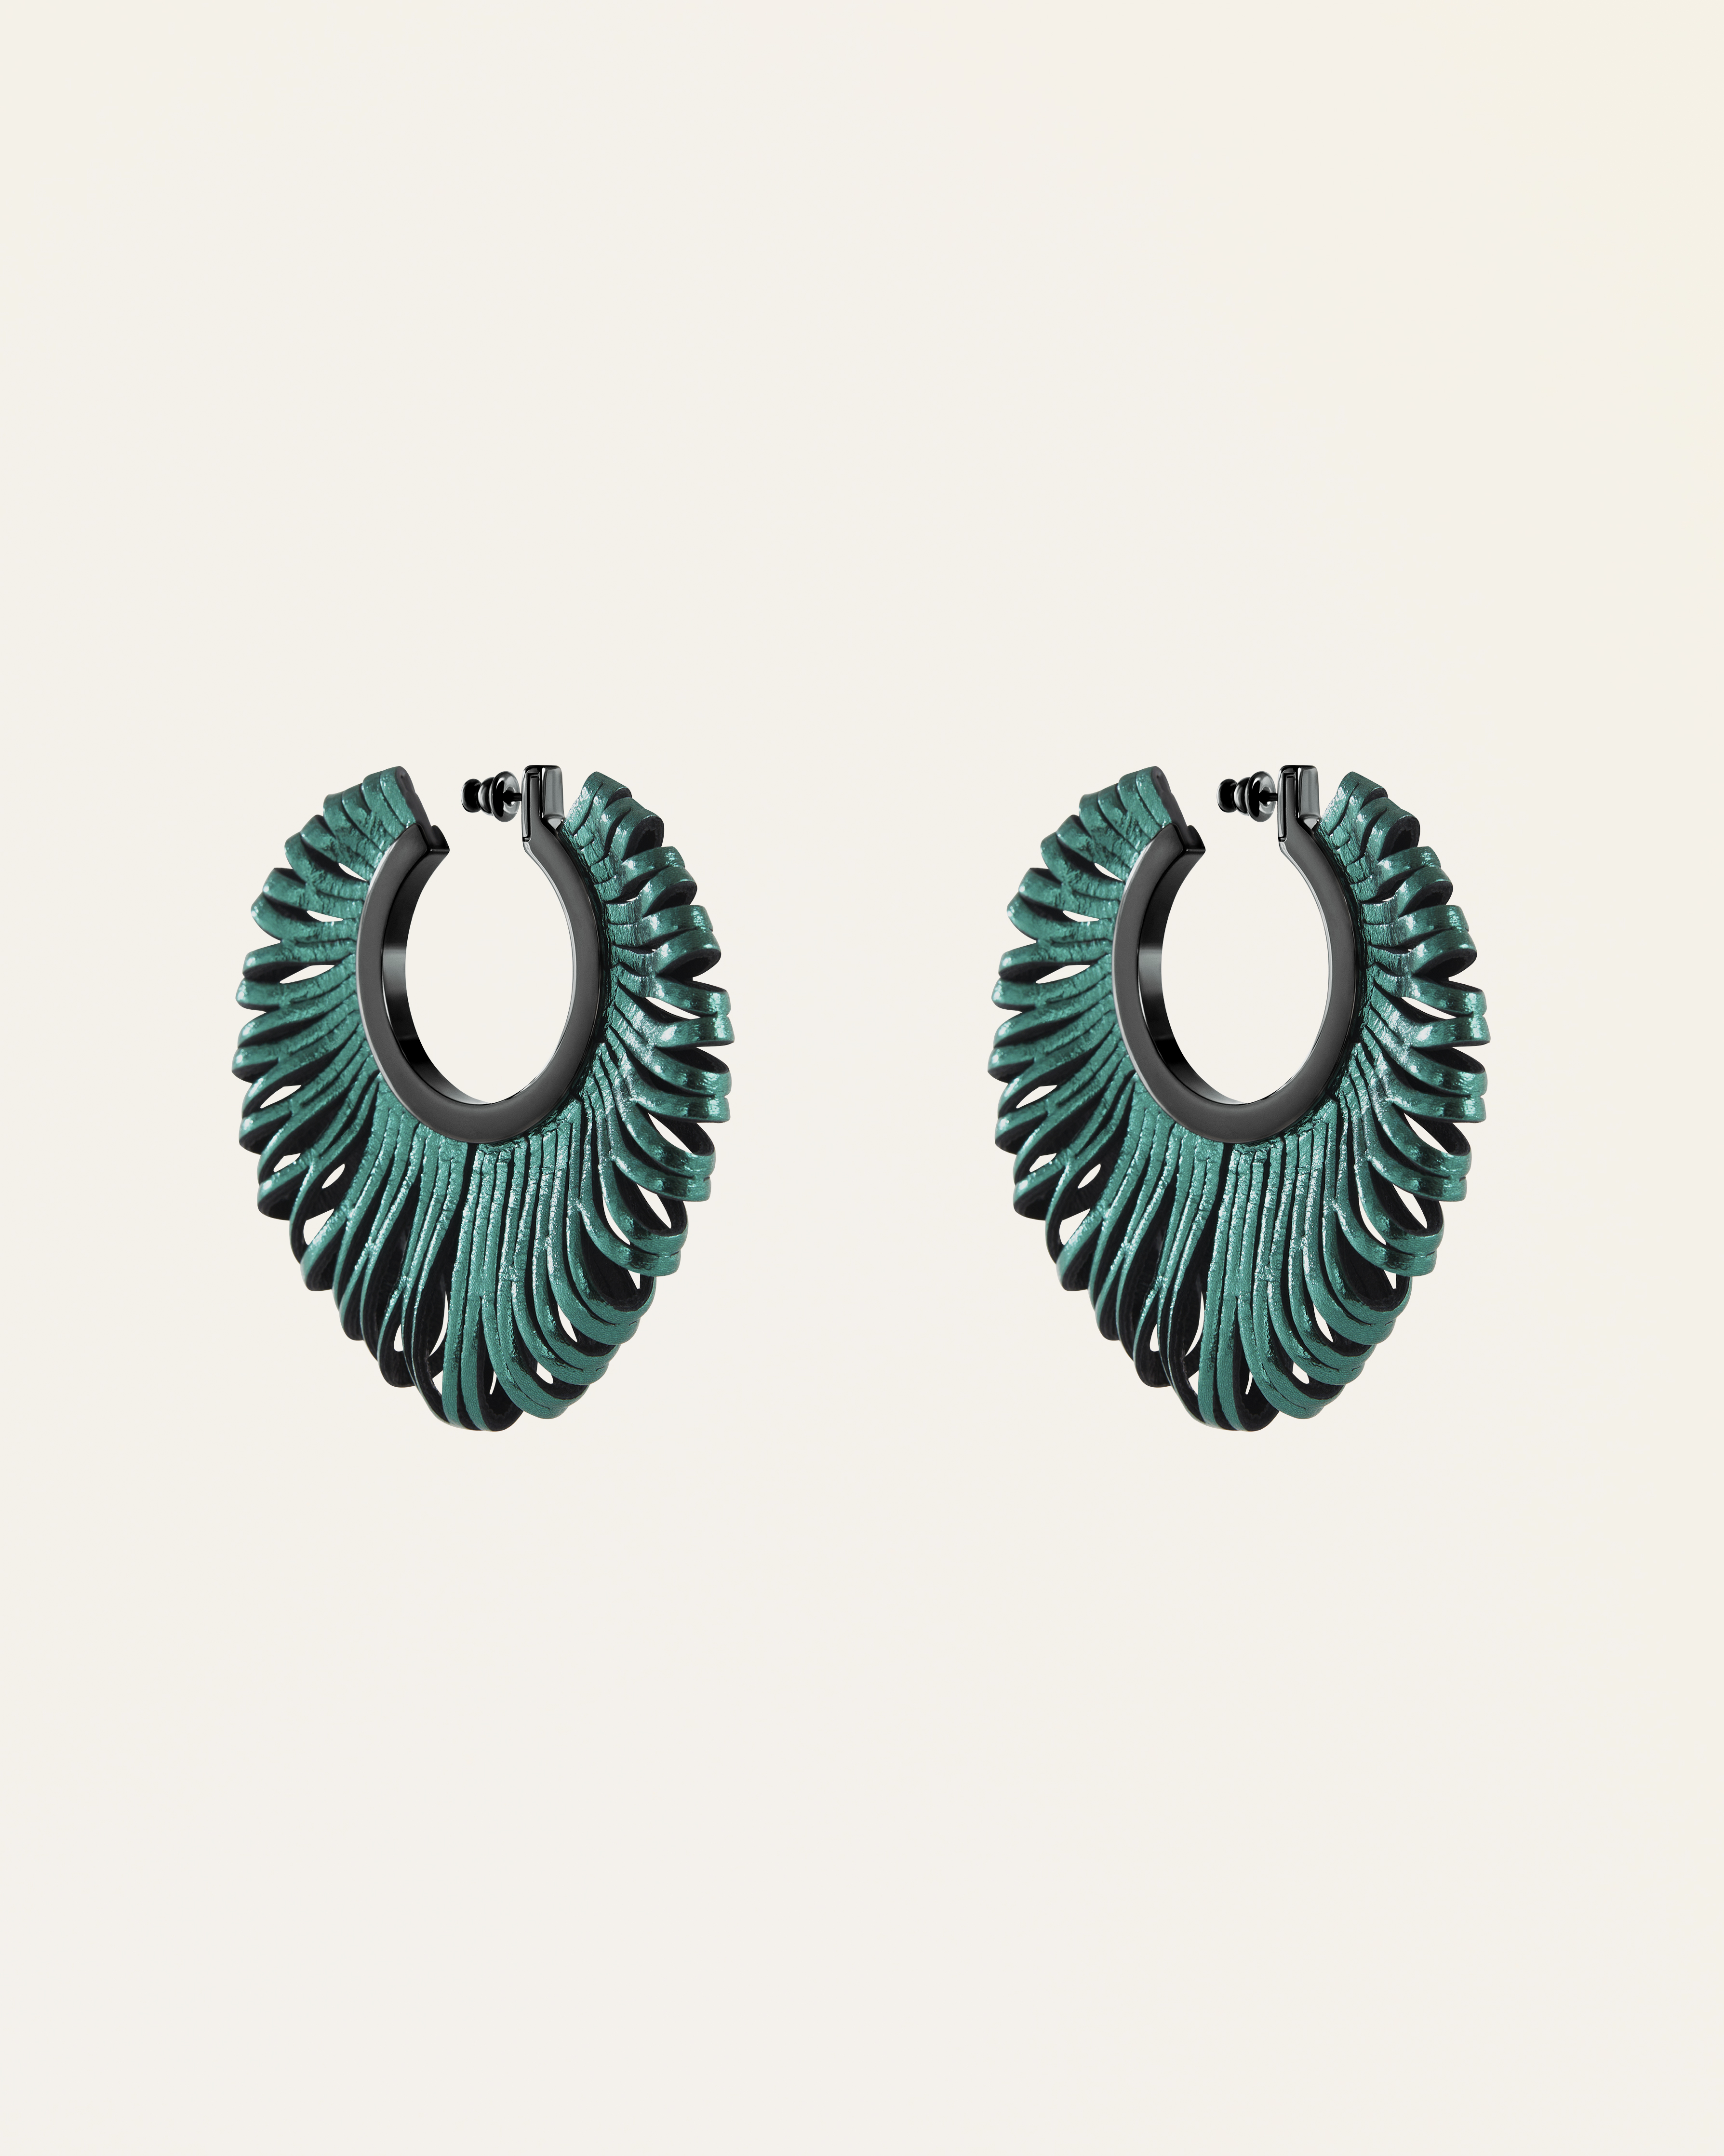 Revolve Earrings in Petrol Green Leather. Image Courtesy of So-Le Studio